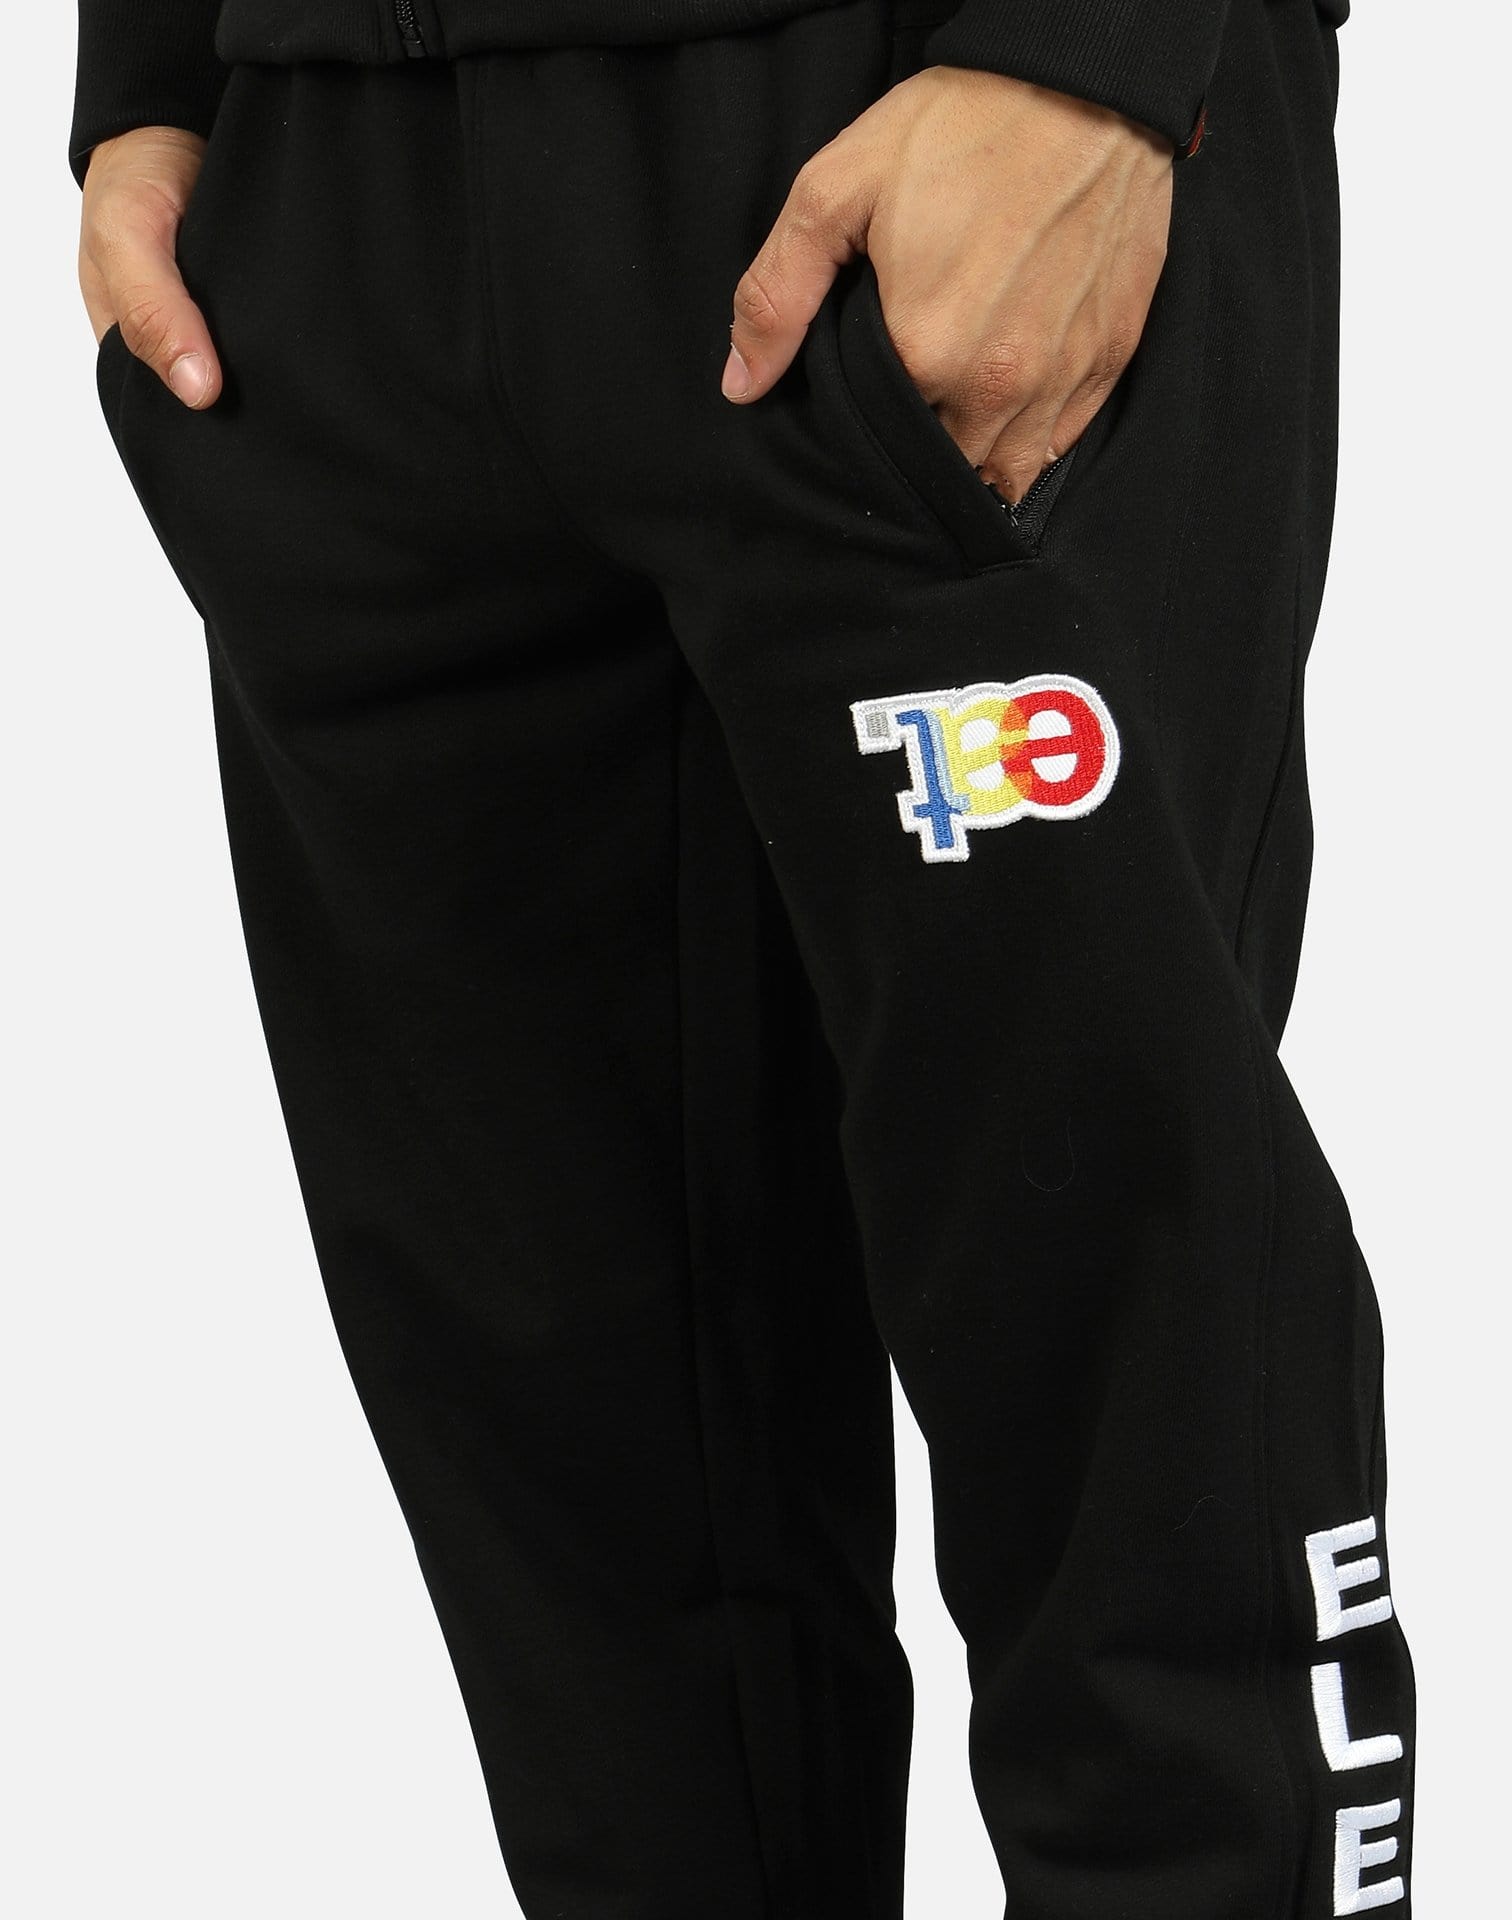 Elevate All The Time Llc 'EAT' JOGGER PANTS